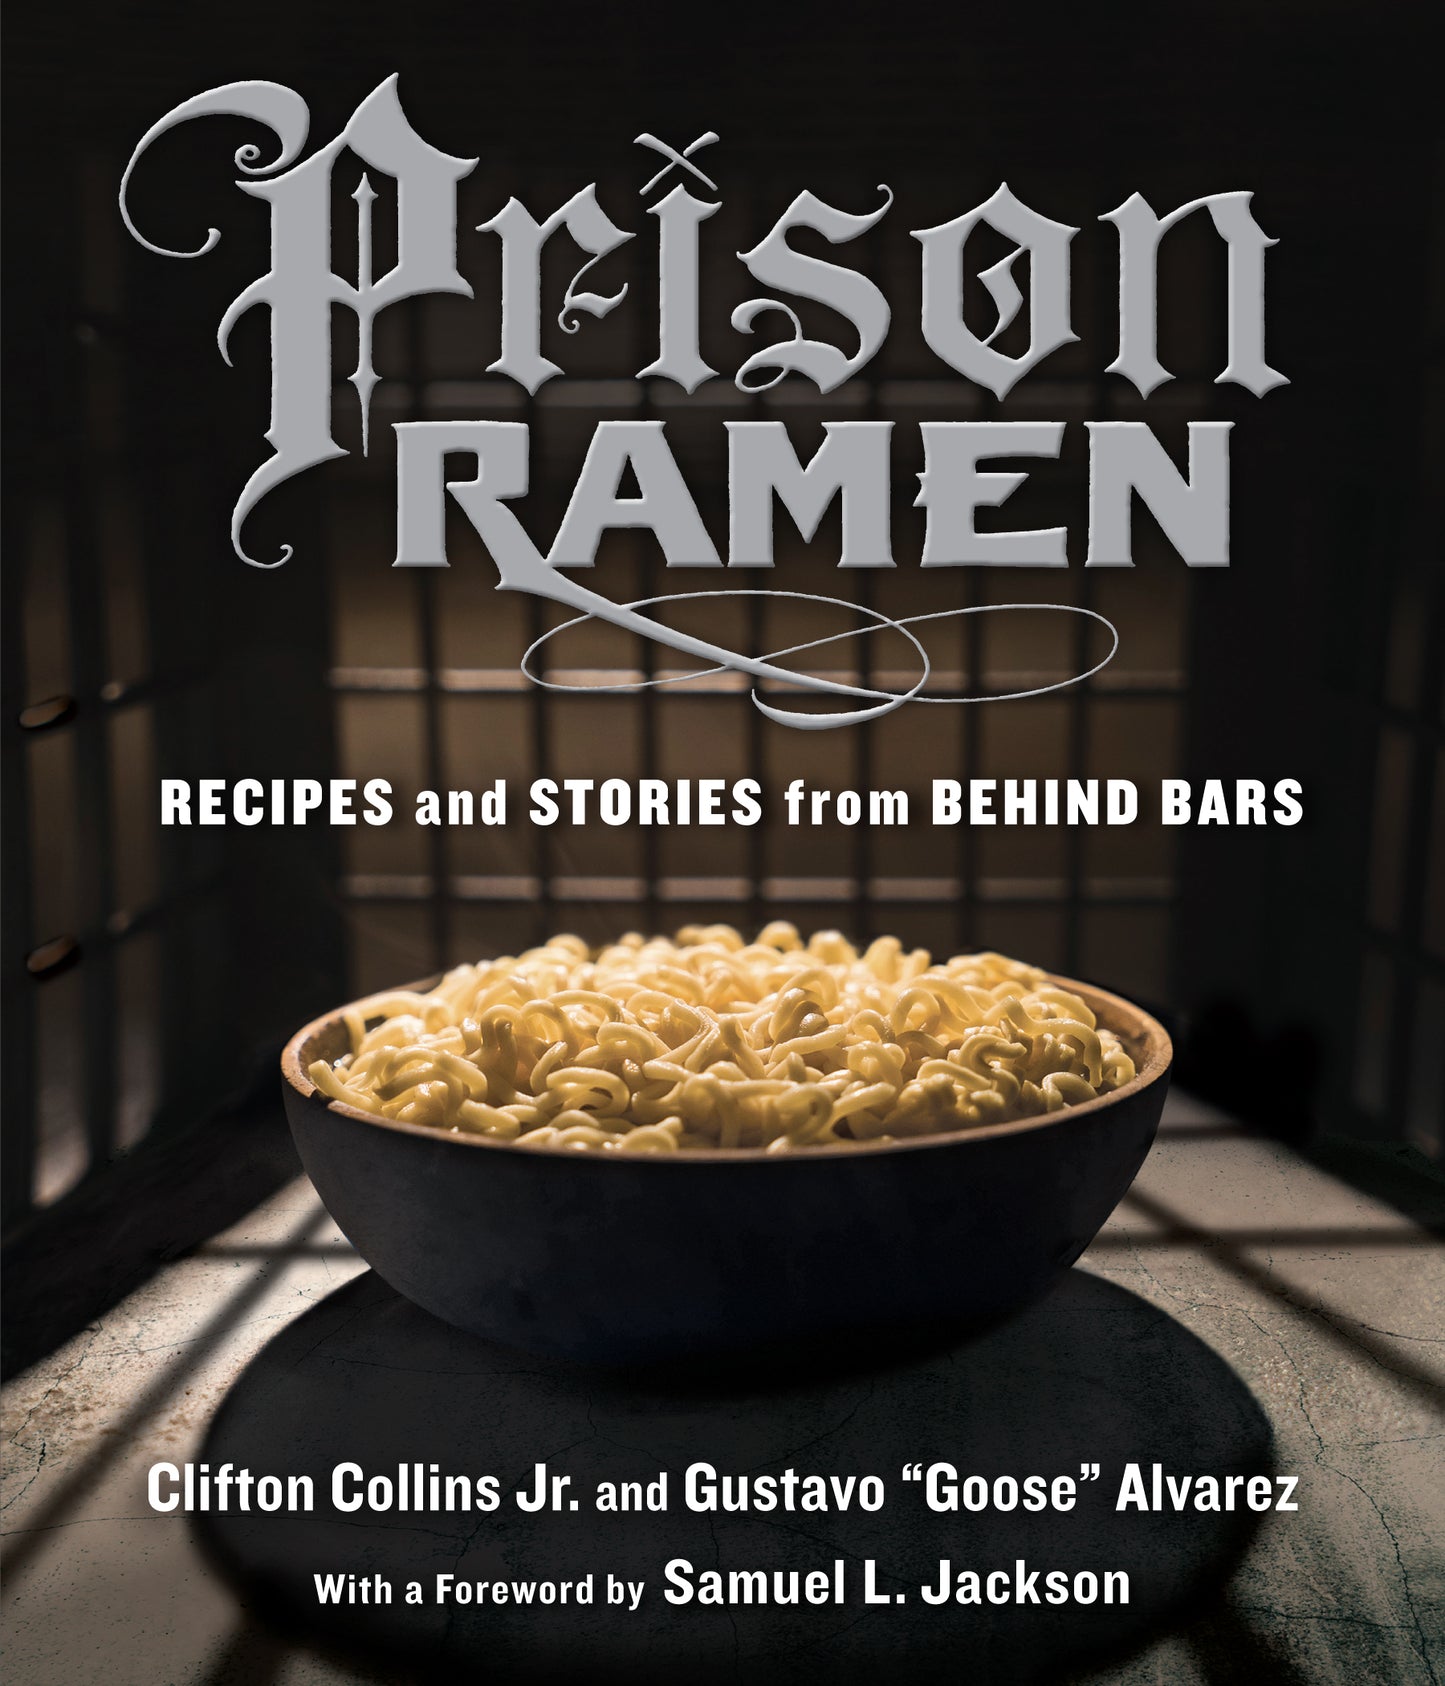 Prison Ramen: Recipes and Stories from Behind Bars - Clifton Collins, Gustavo “Goose” Alvarez